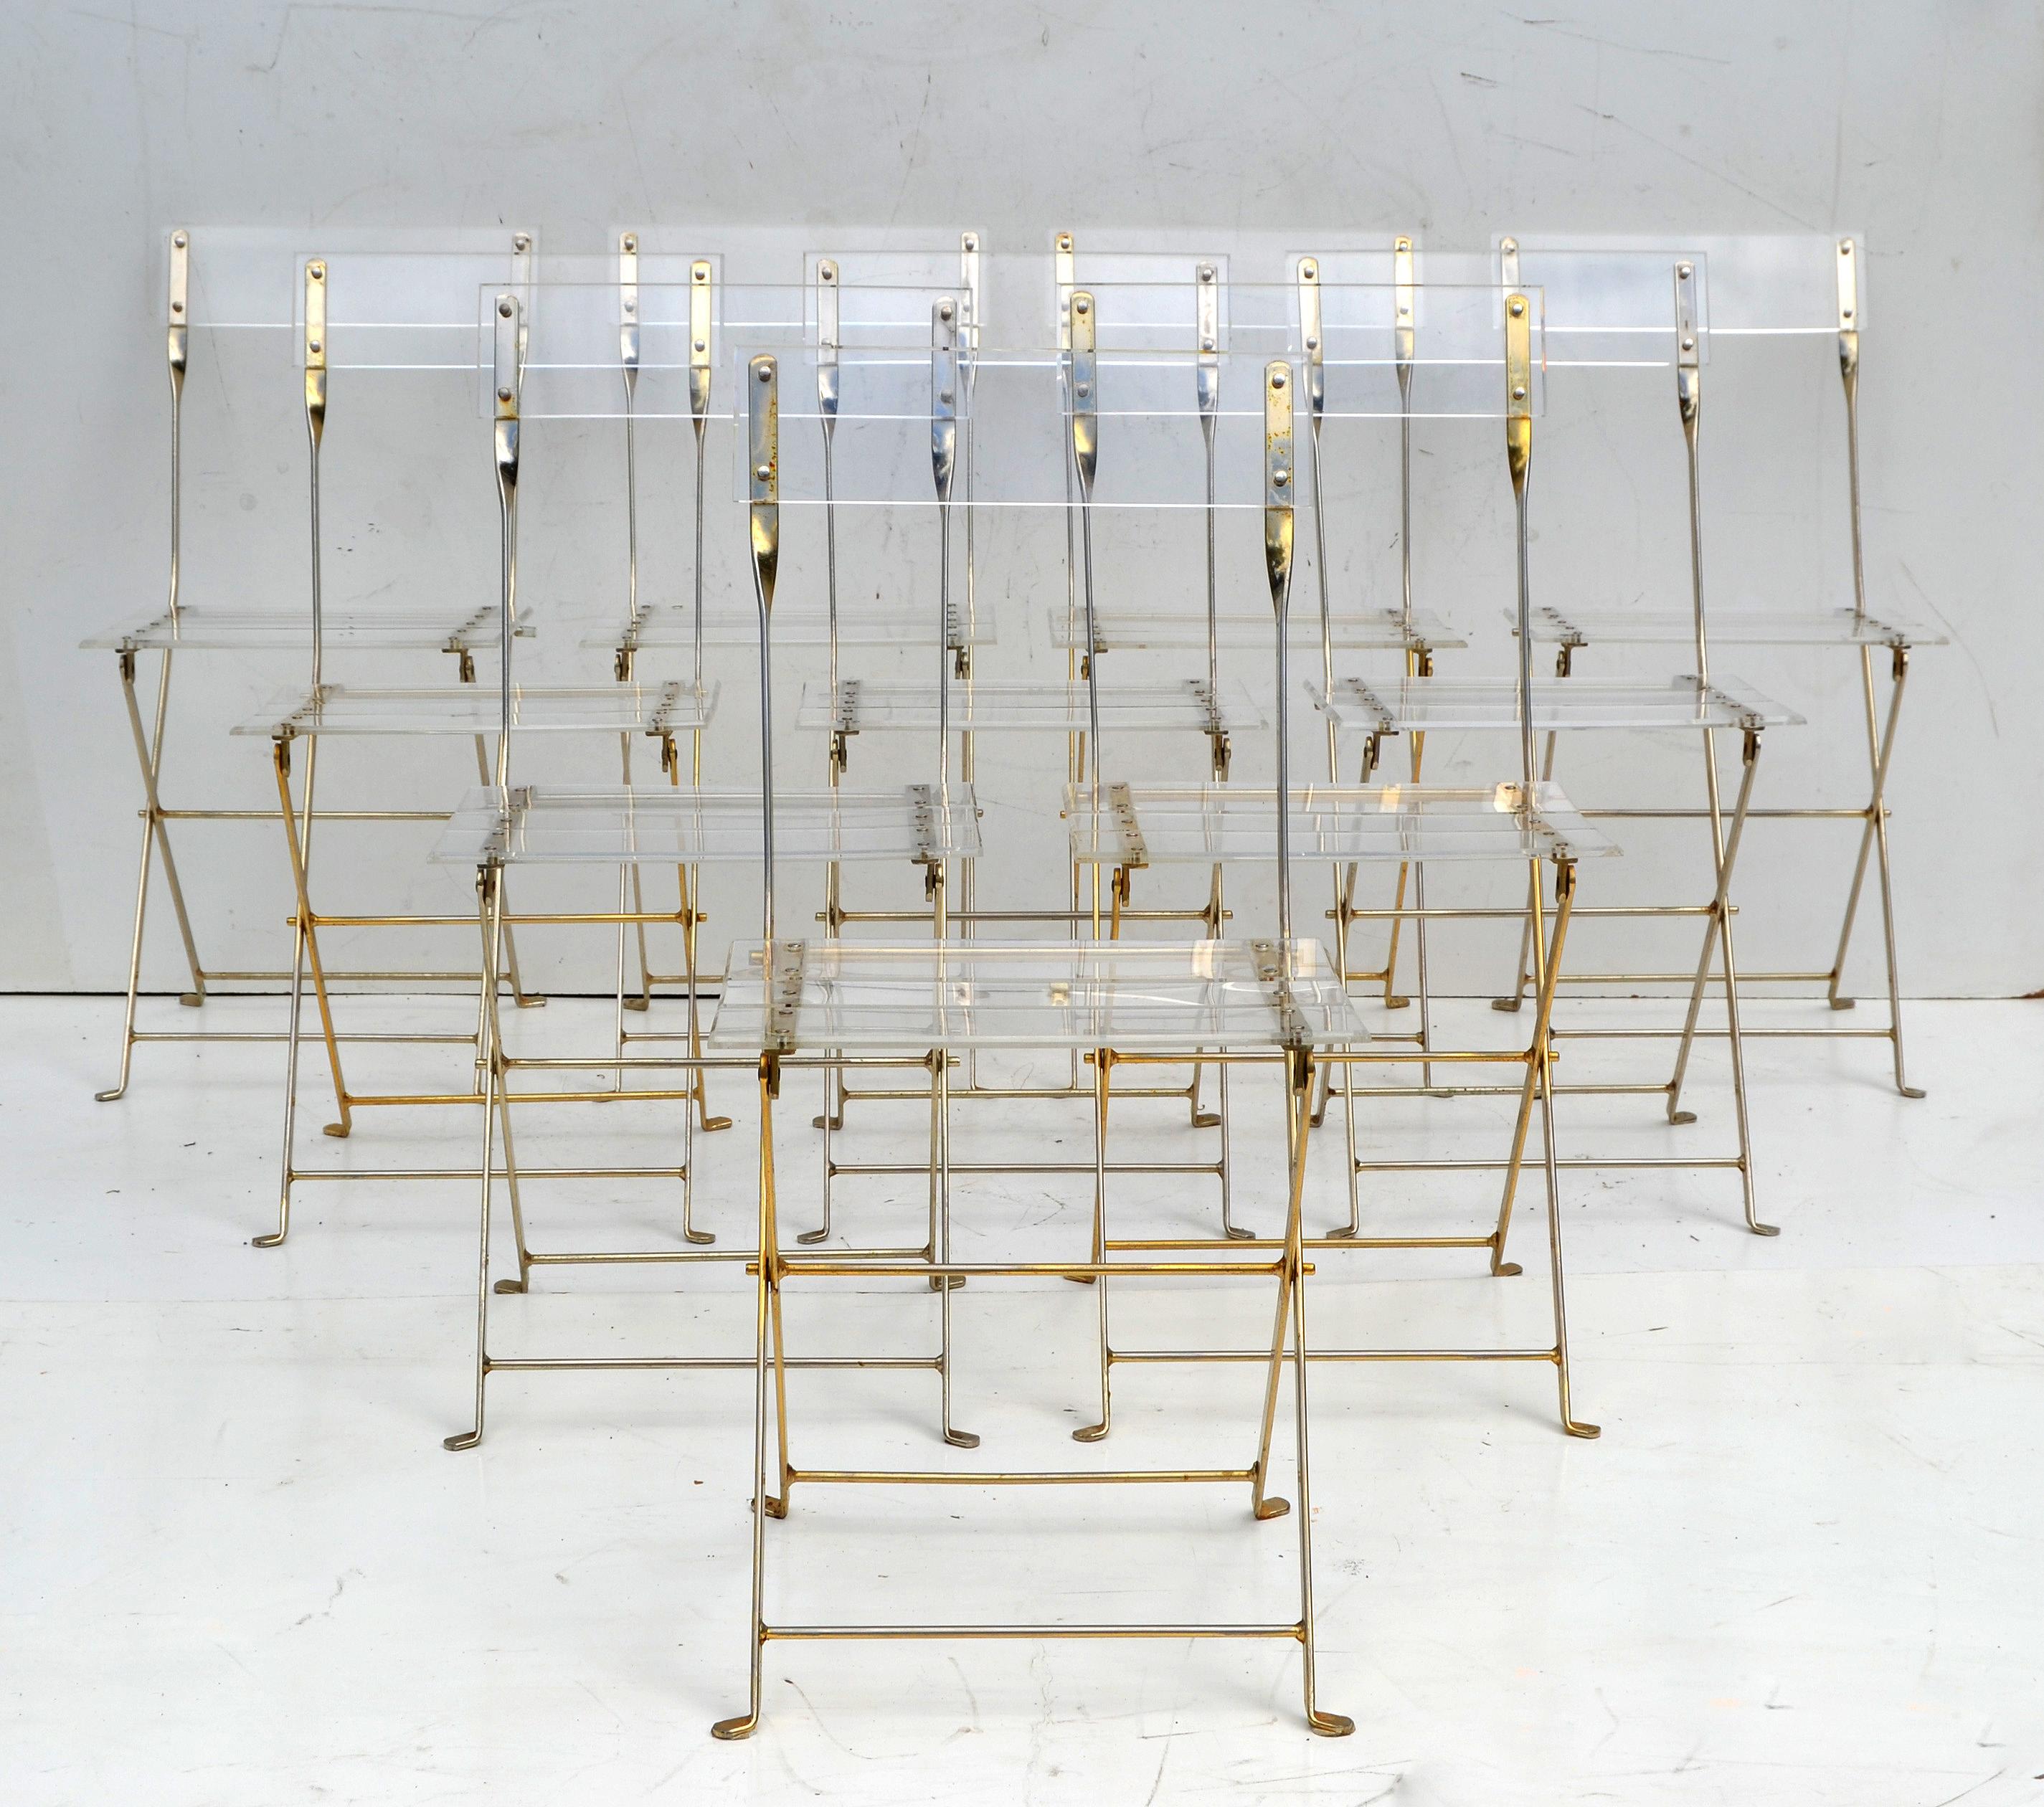 Fantastic set of 10 Lucite folding chairs by Yonel Lebovici, in brass plated steel and Lucite. 
For Marais International, Edition du Marais.
Circa 1970.

Measure folded: height: 38.63 x 15.75 x 3.75 depth.